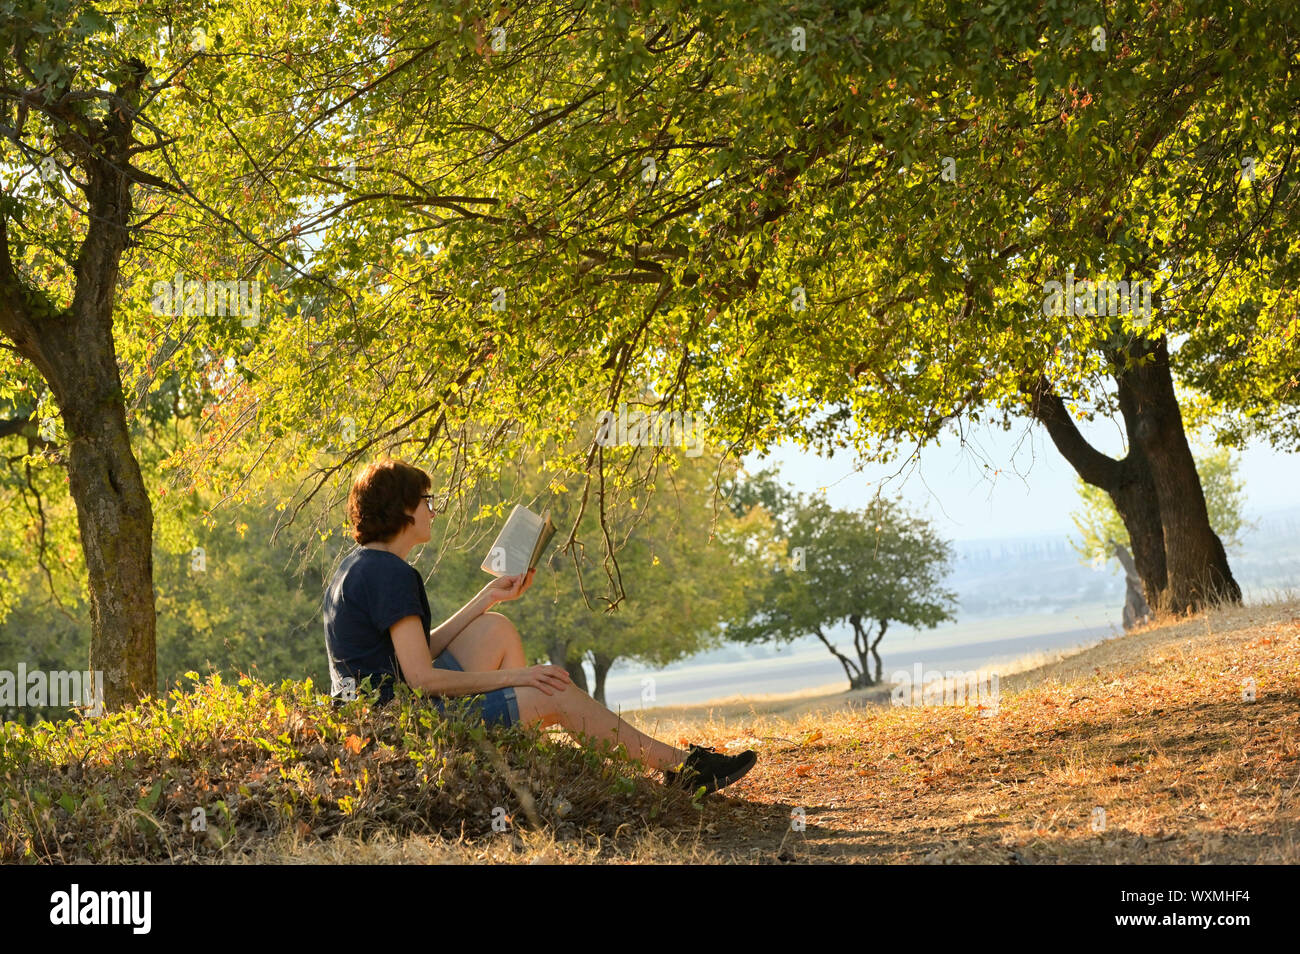 Woman reading a book in autumn forest Stock Photo